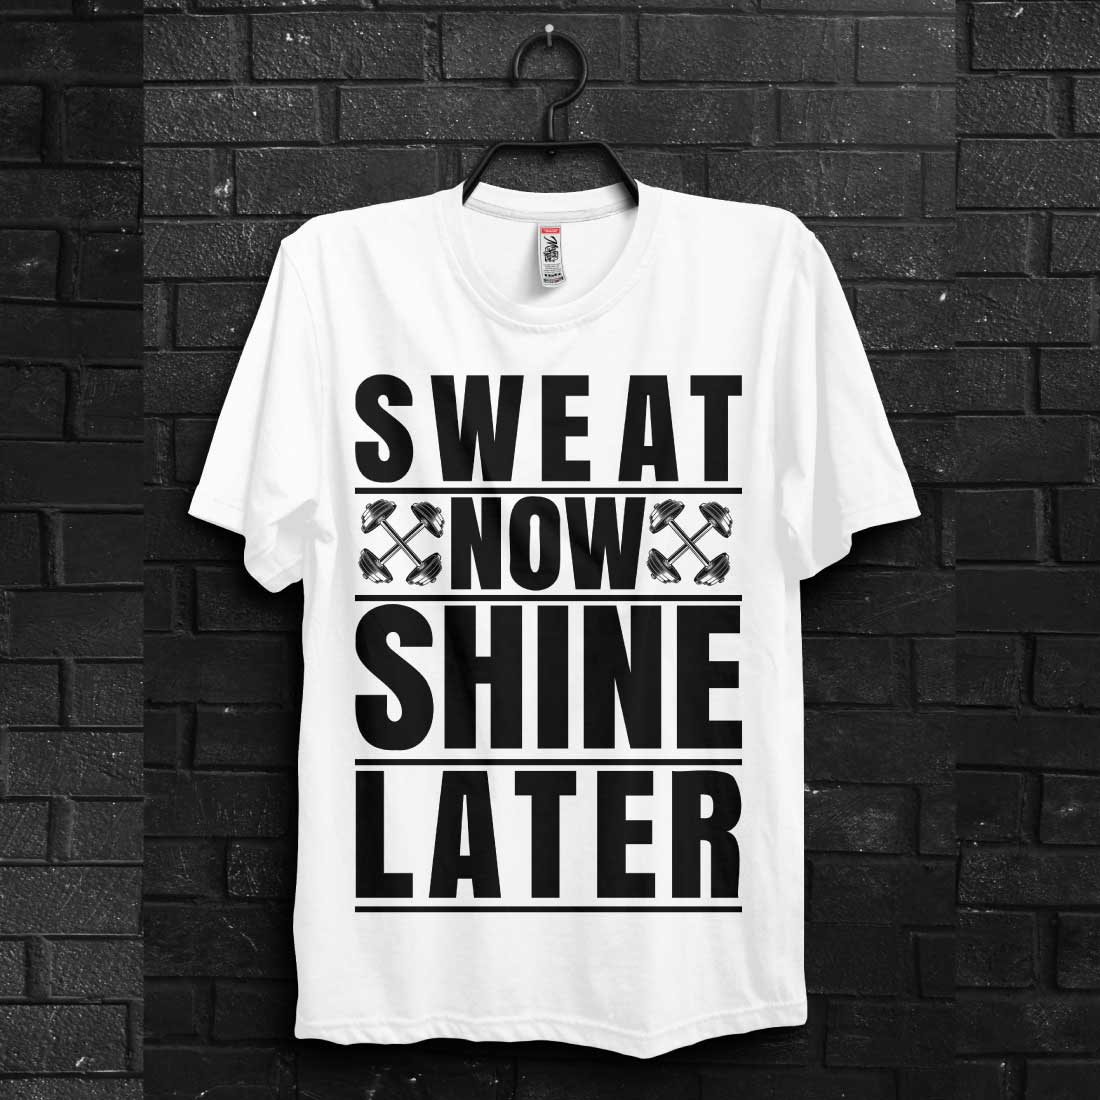 White t - shirt that says sweat at now shine later.